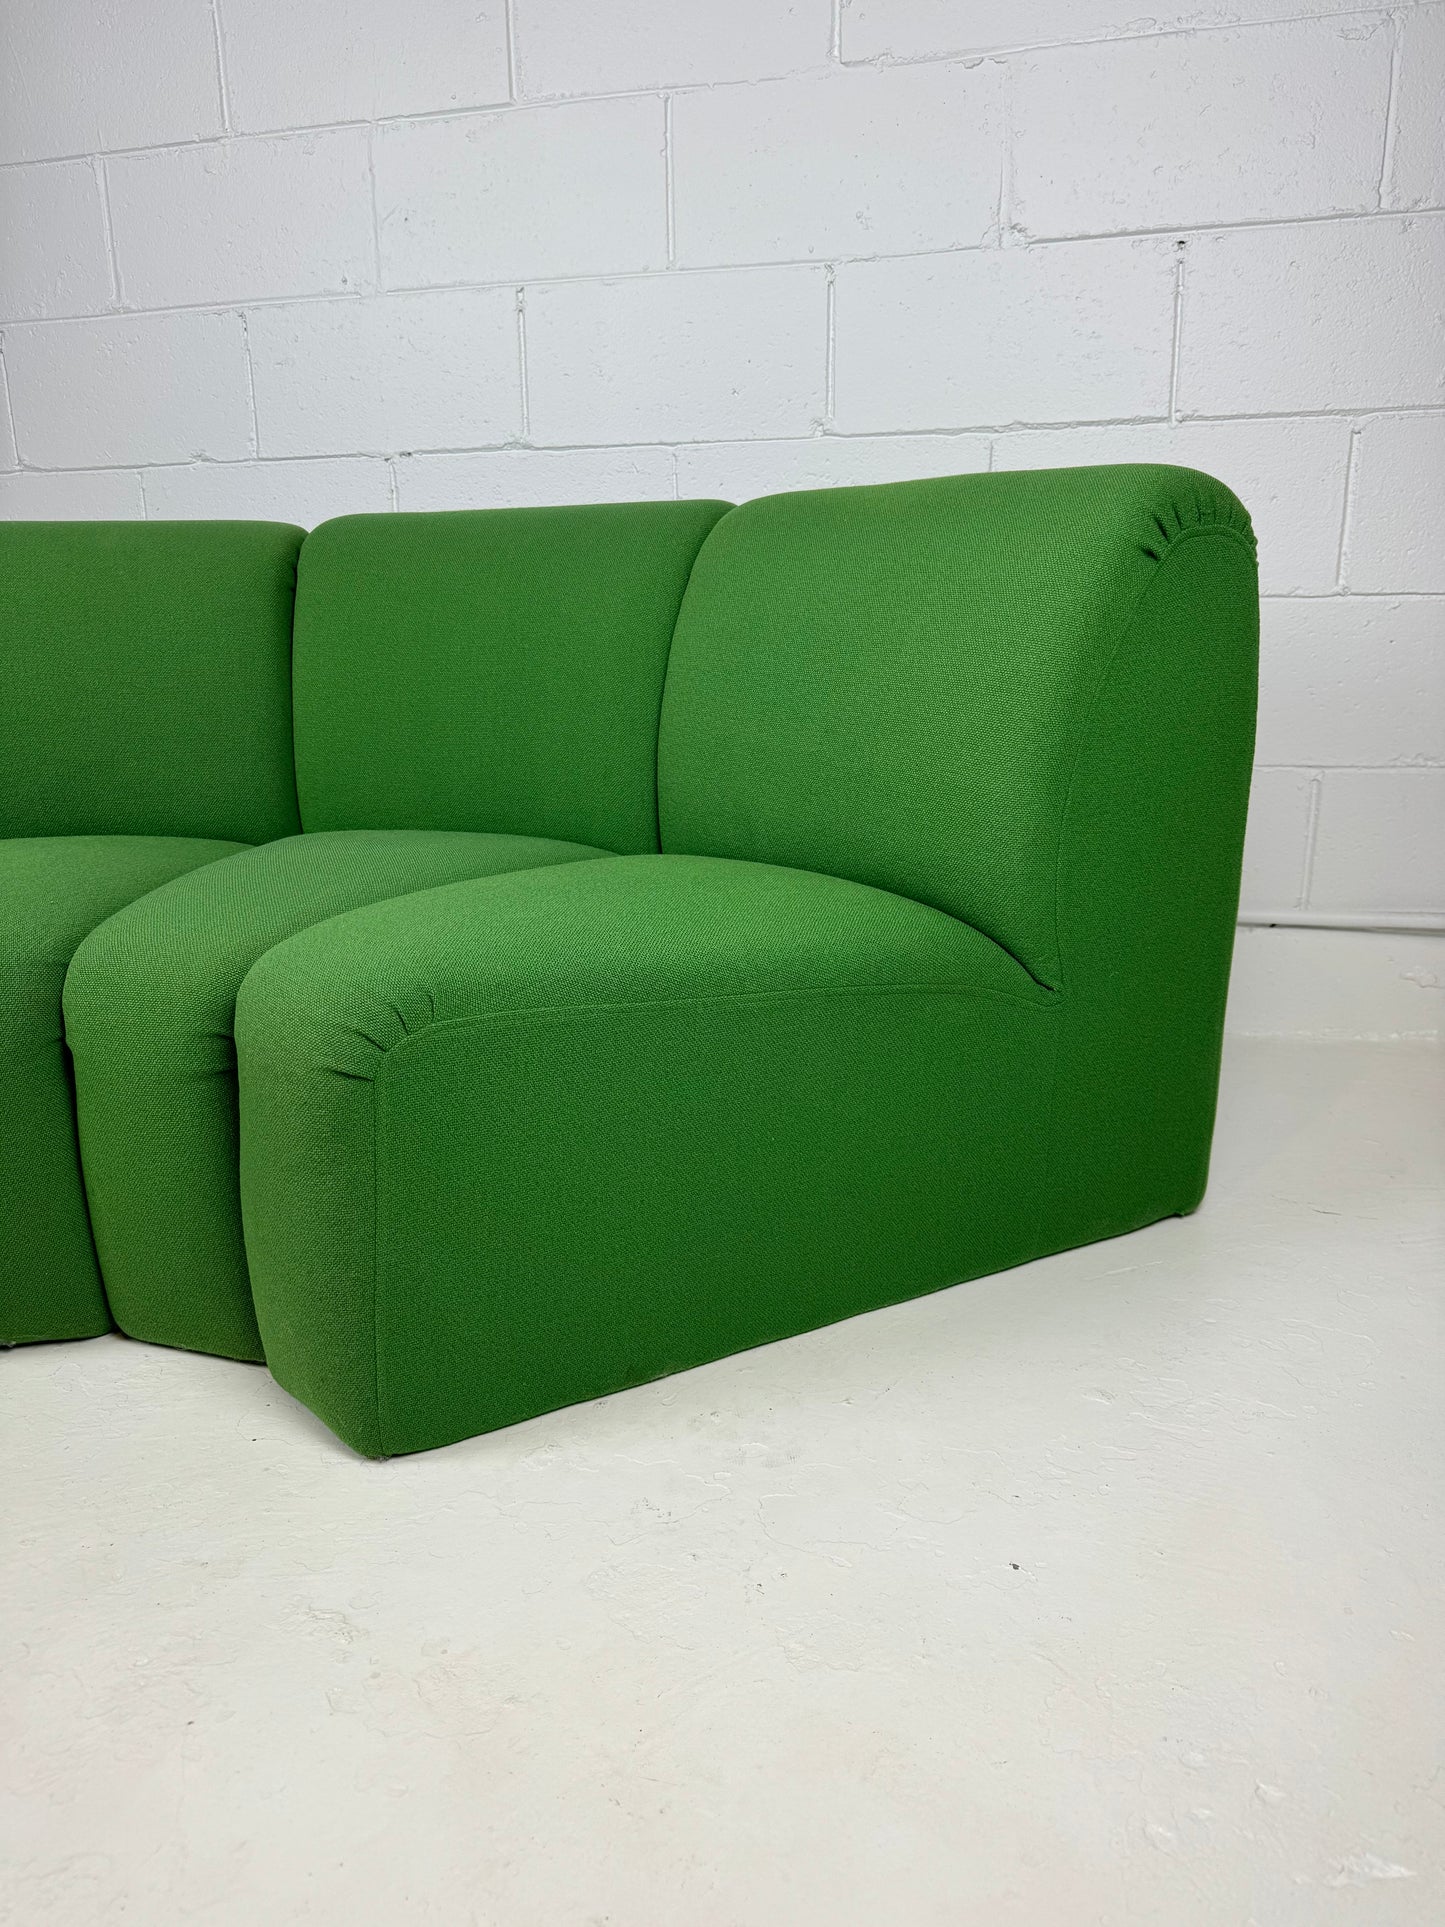 Pierre Paulin Mississippi Sectional Sofa for Artifort